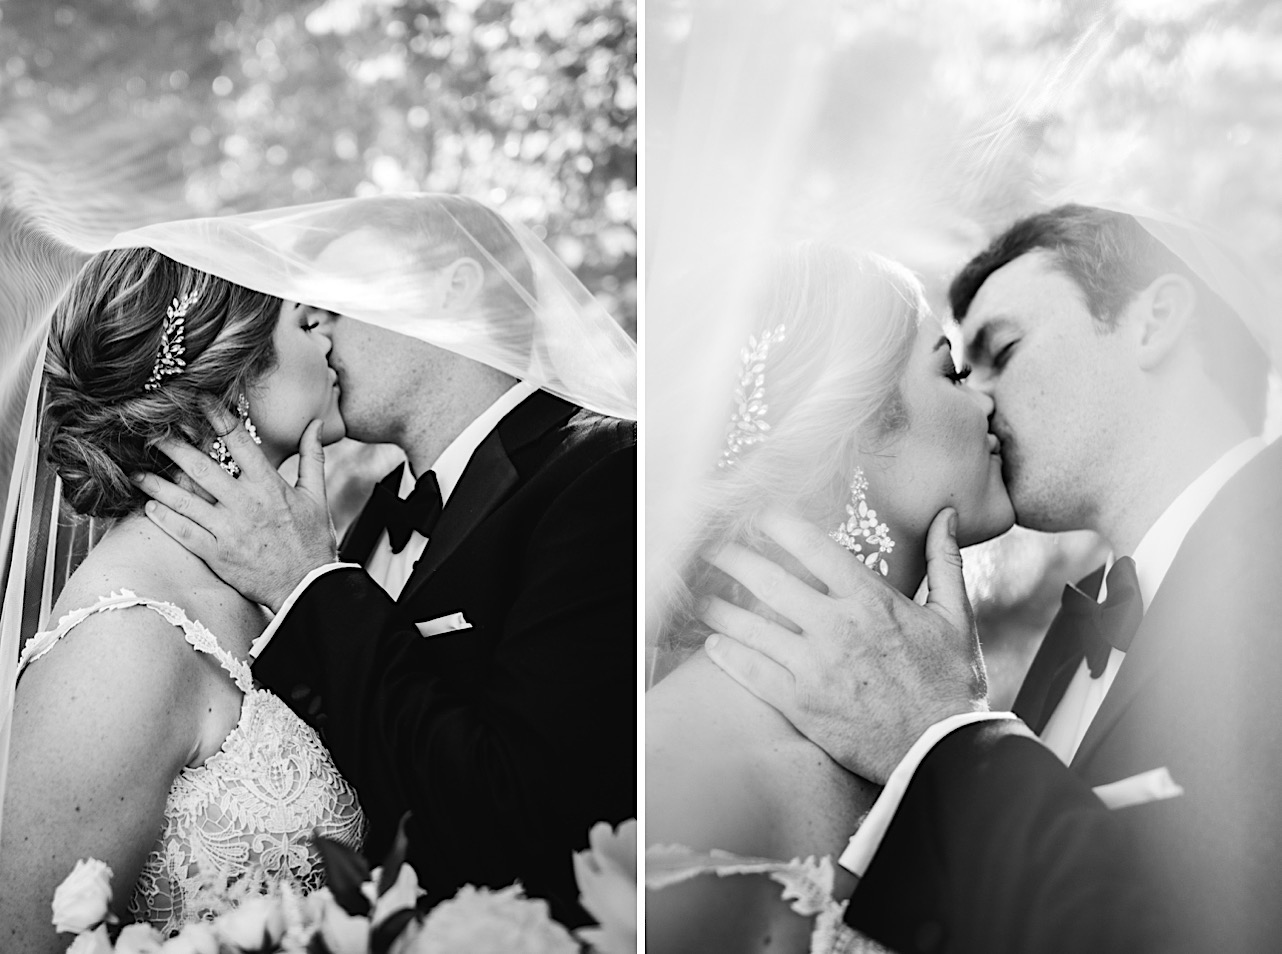 groom holds bride's face and kisses her under her sheer veil